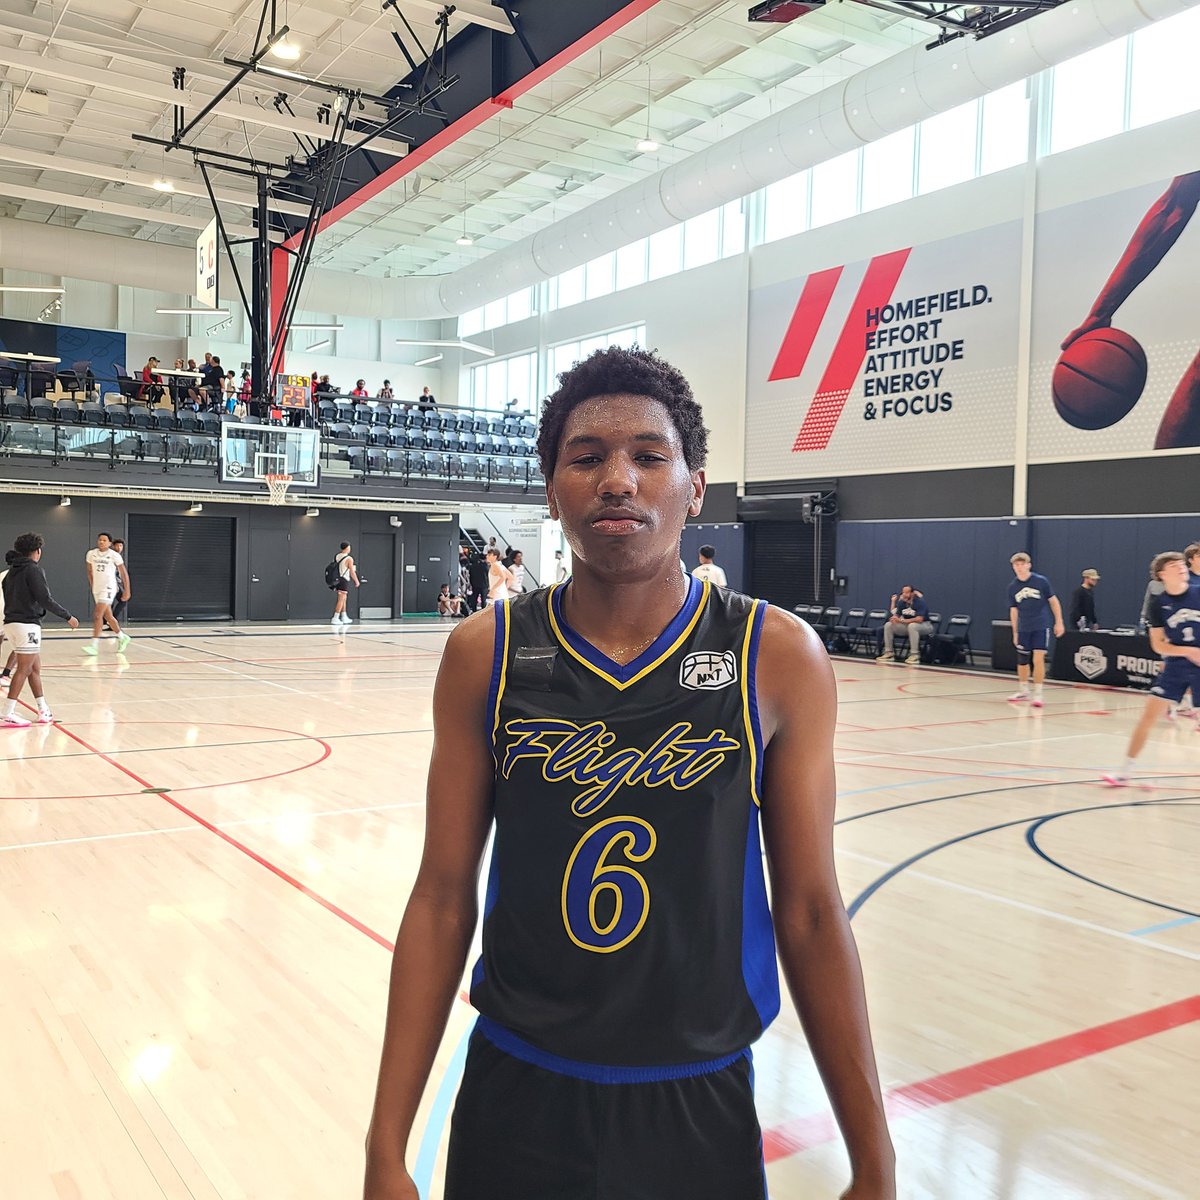 '25 Jaise Combs with a monster game shooting 6/9 from distance. Shooting versatility was on display as he connected on a few pull-up 3s with a hand in his face. Good size at 6'5 with a fluid one motion lefty release @JaiseCombs2 @flightbball417 @NxtProHoops